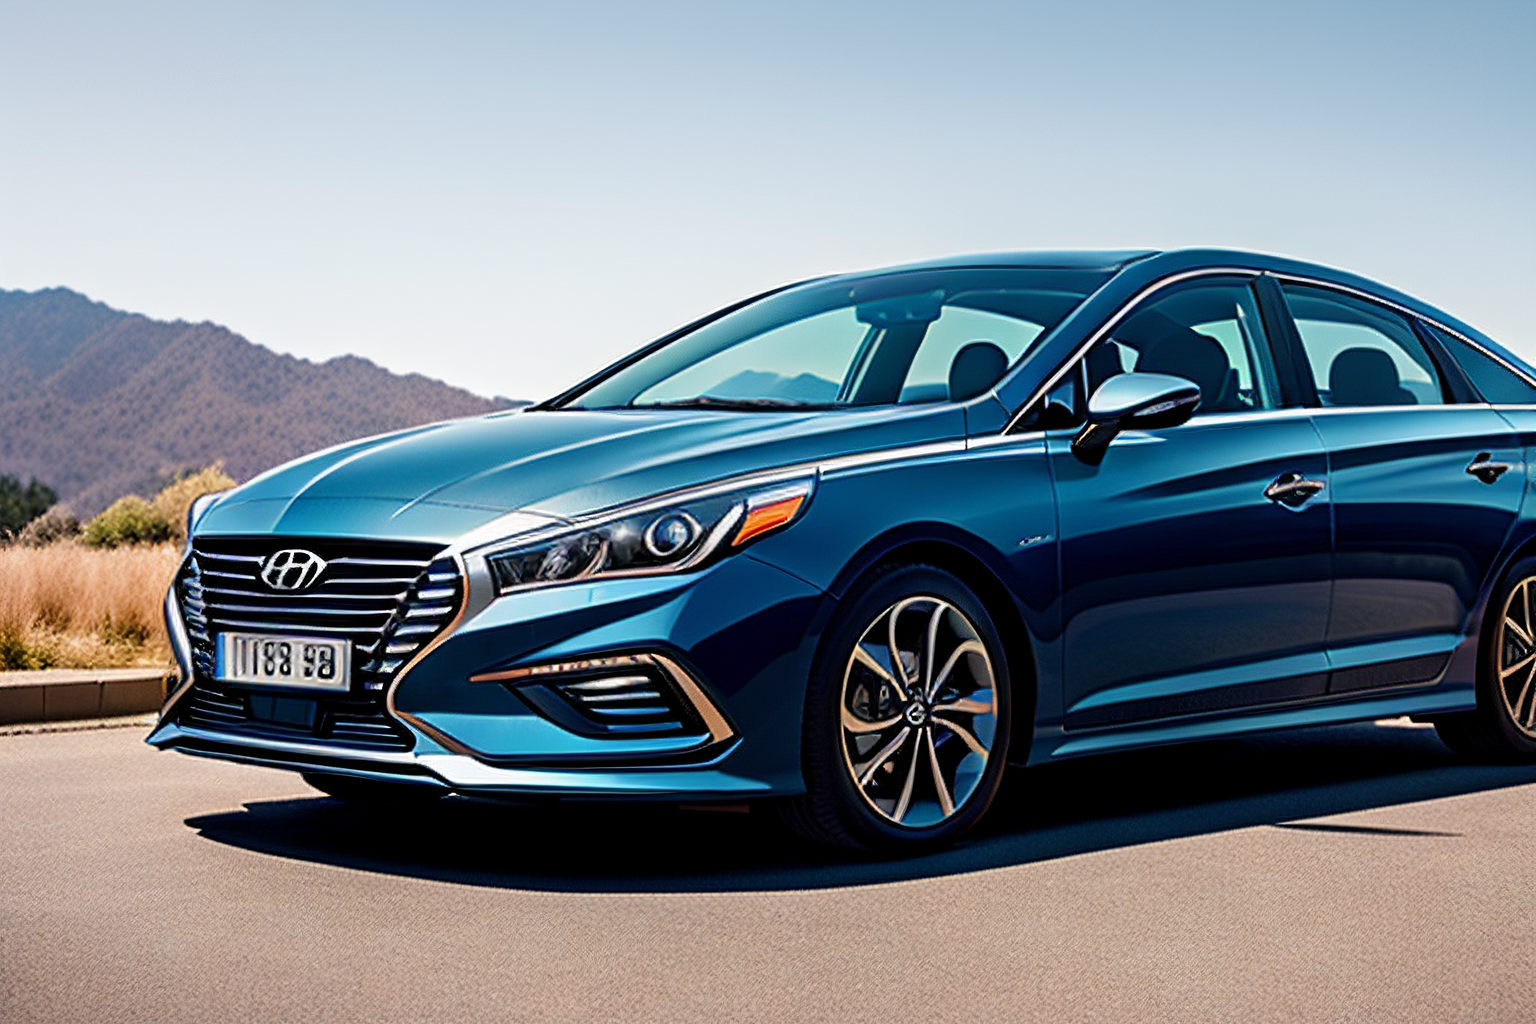 demystifying the hyundai sonata code whats really going on